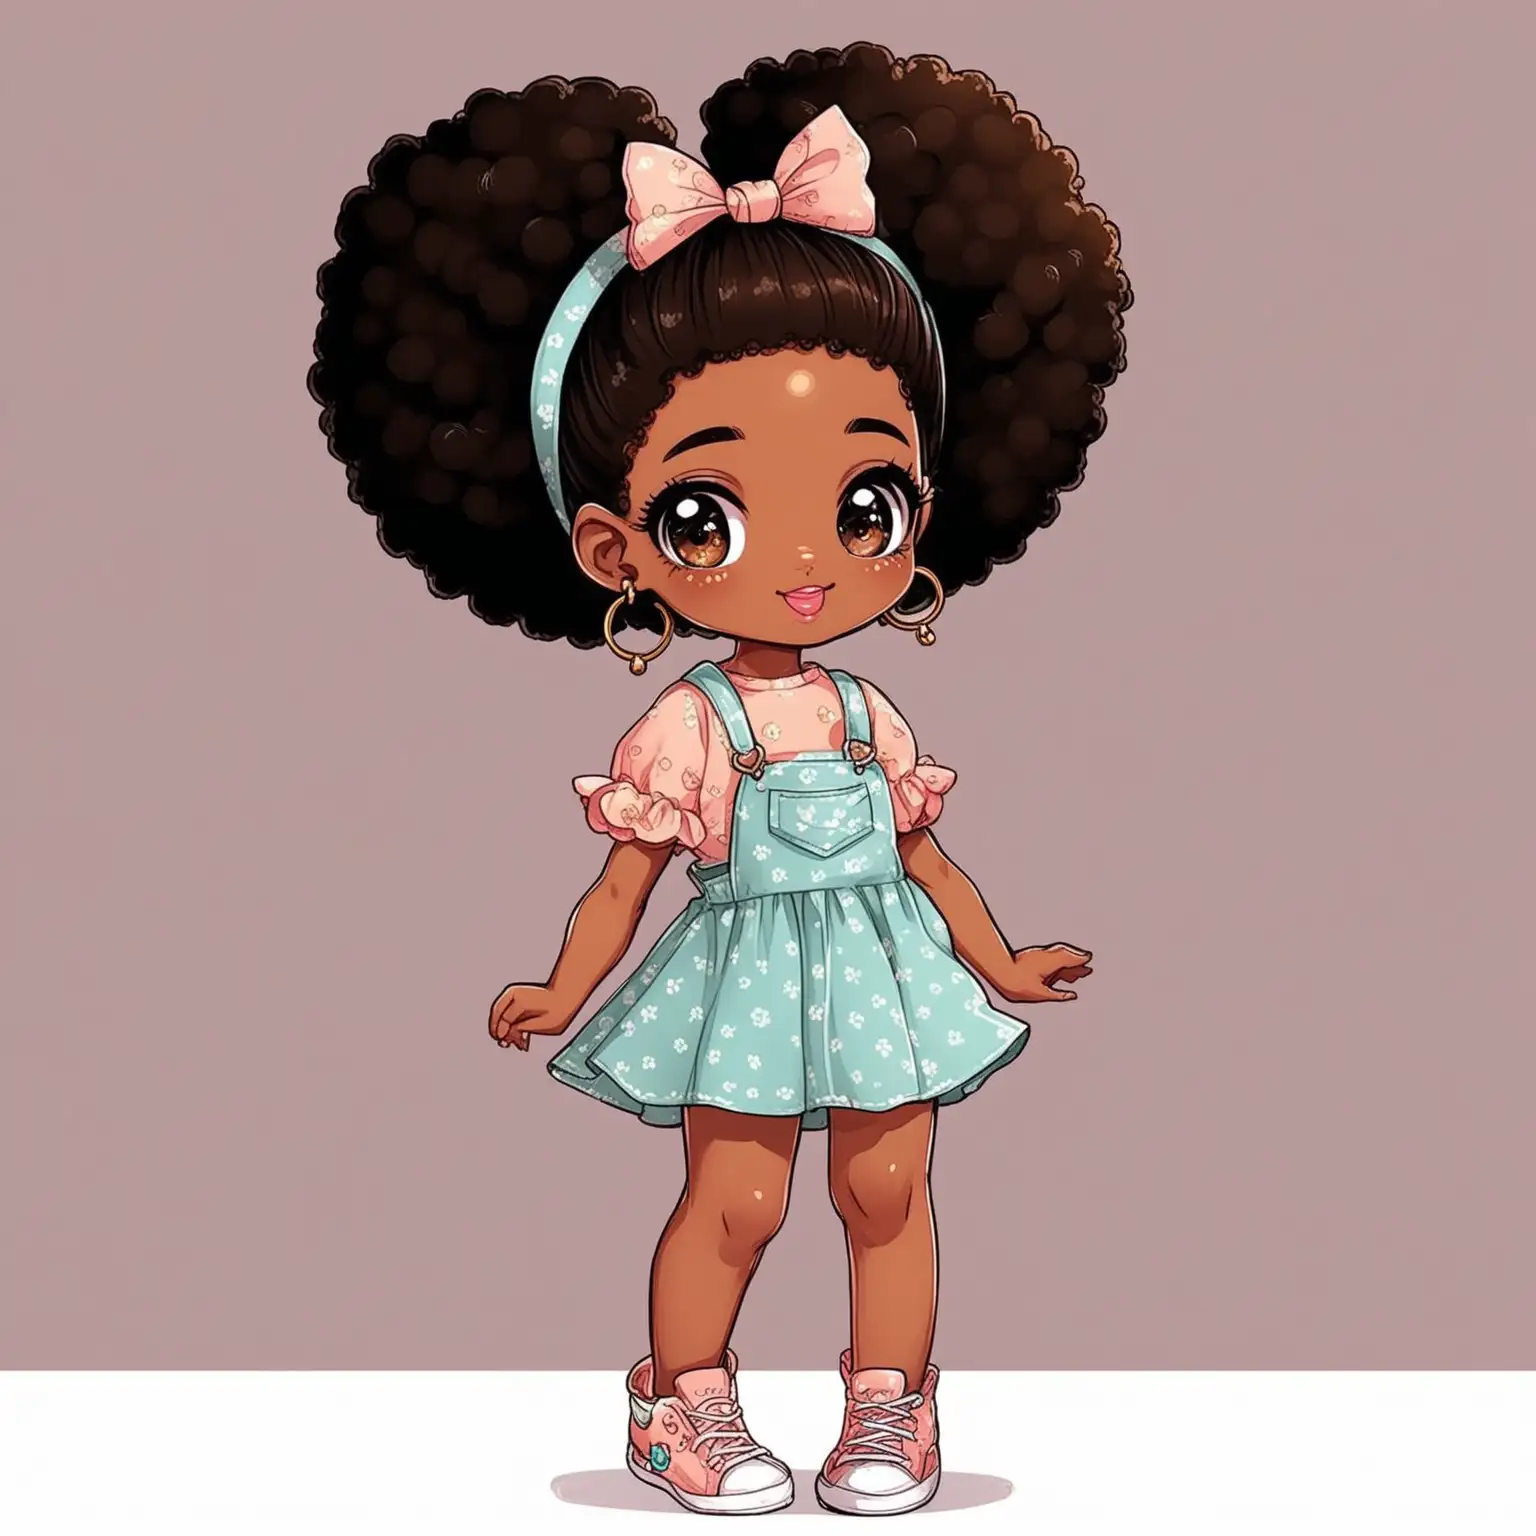 Little Melanin Girl with Afro Puffs in a Cute Outfit